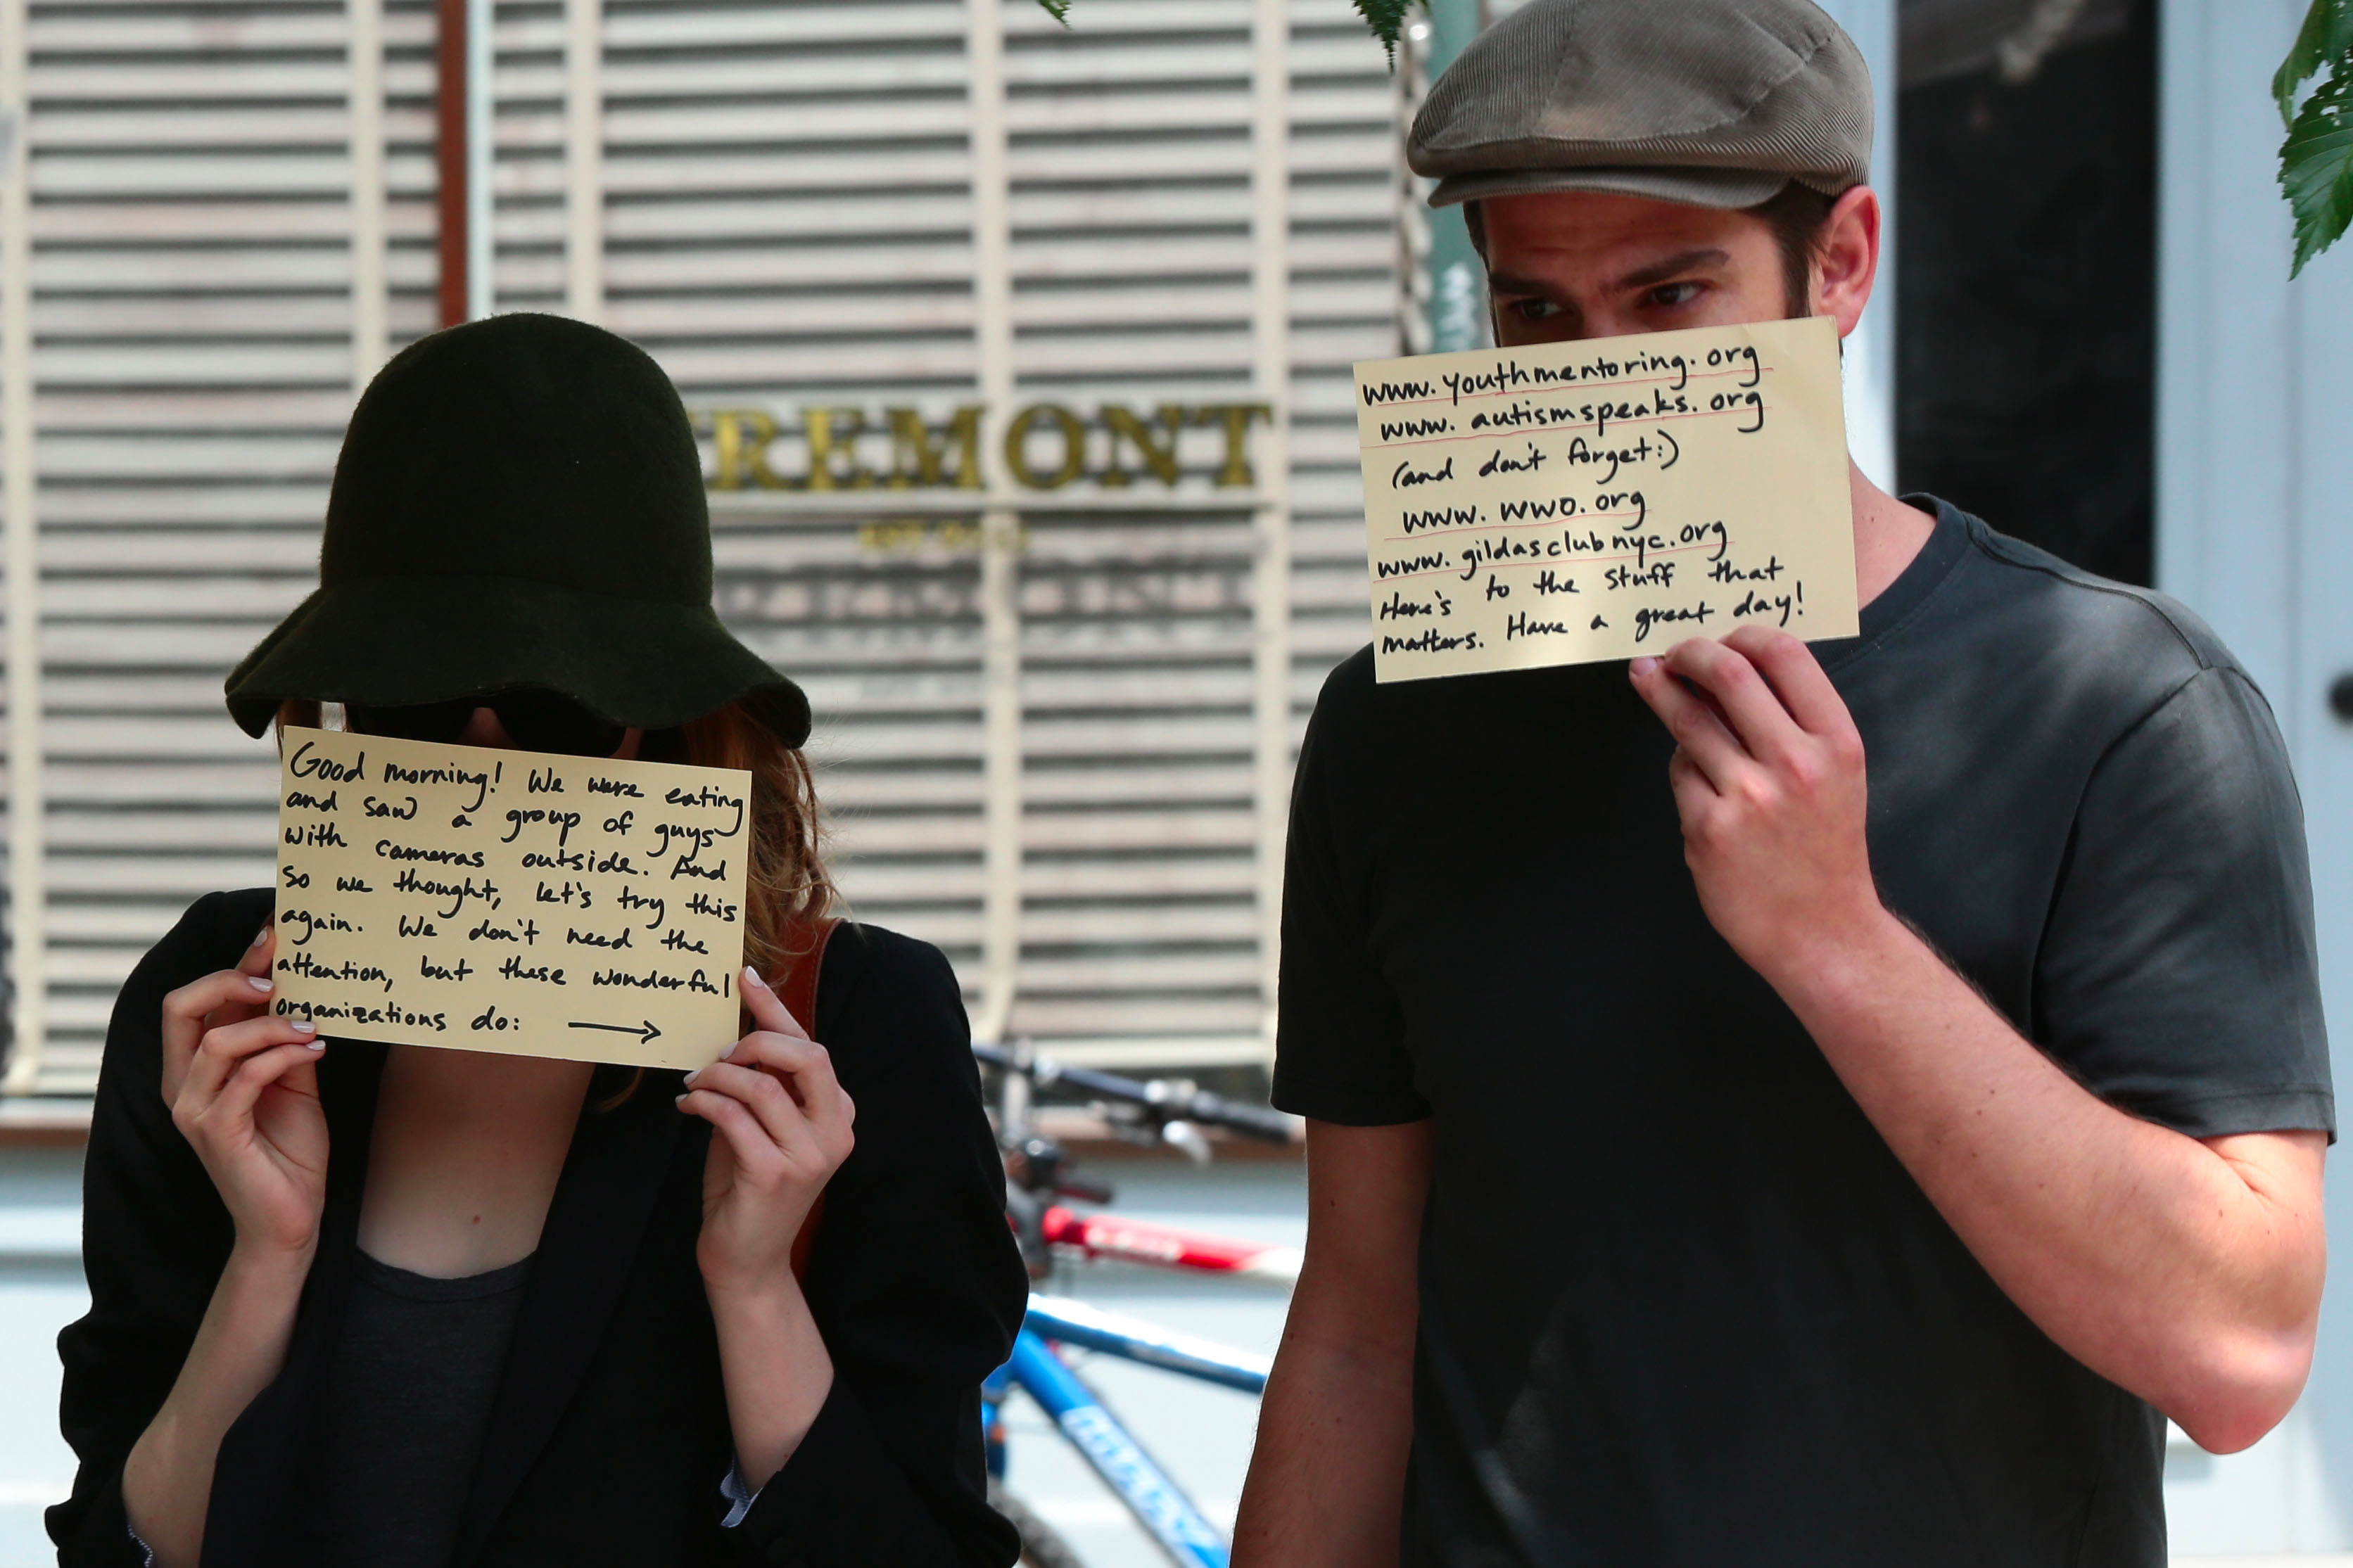 emma stone and andrew garfield force paparazzi to do something nice